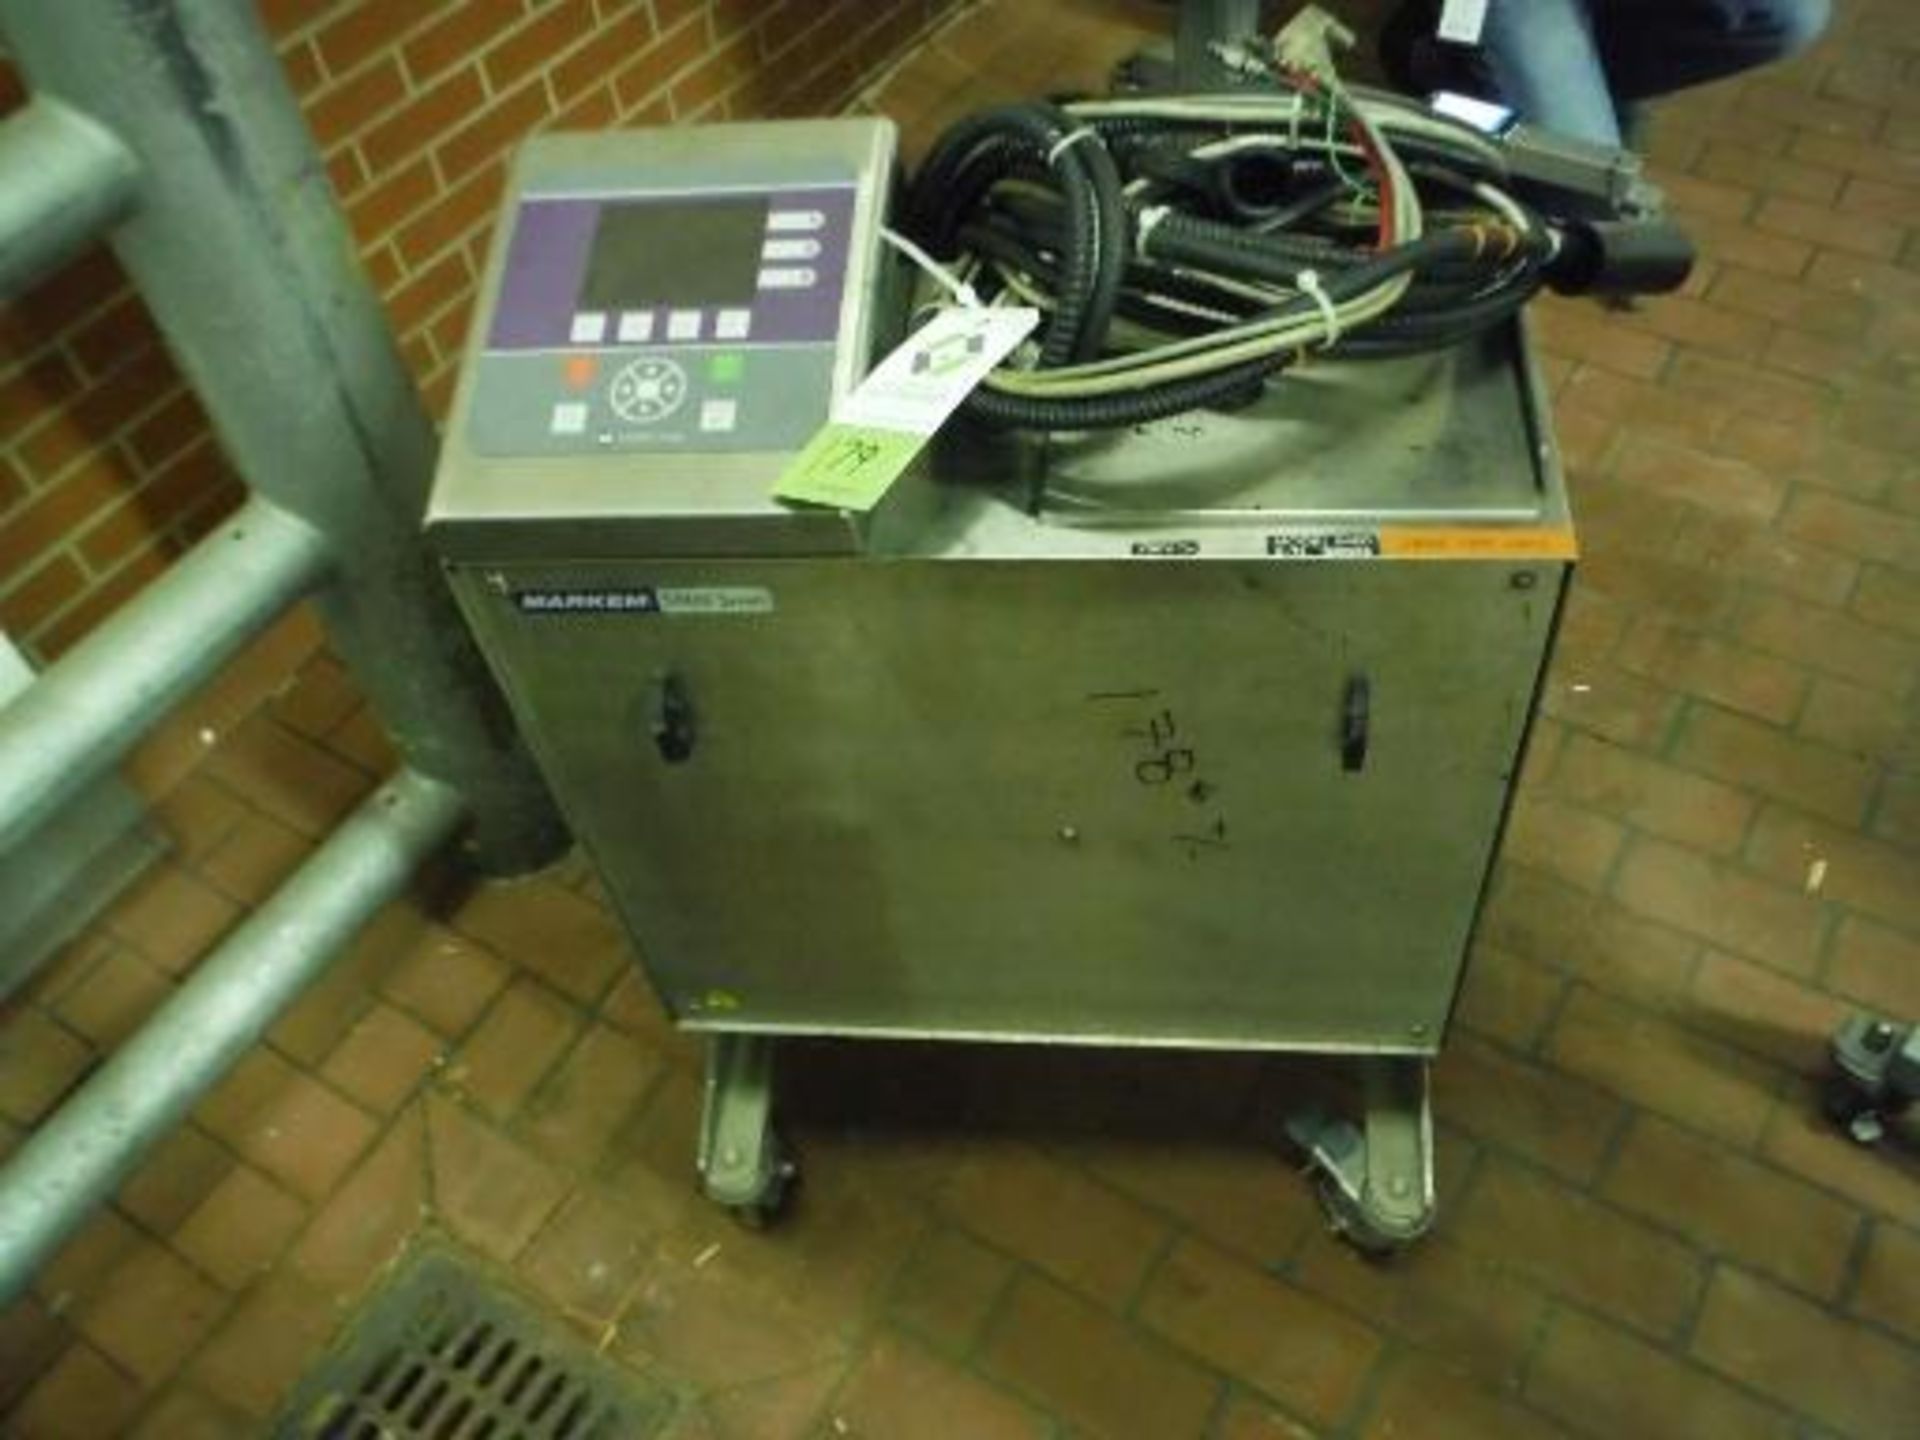 Markem code dater 5000 series, Model 5400, SN 042236 (ET-31866) This Item Is Located in Quincy,